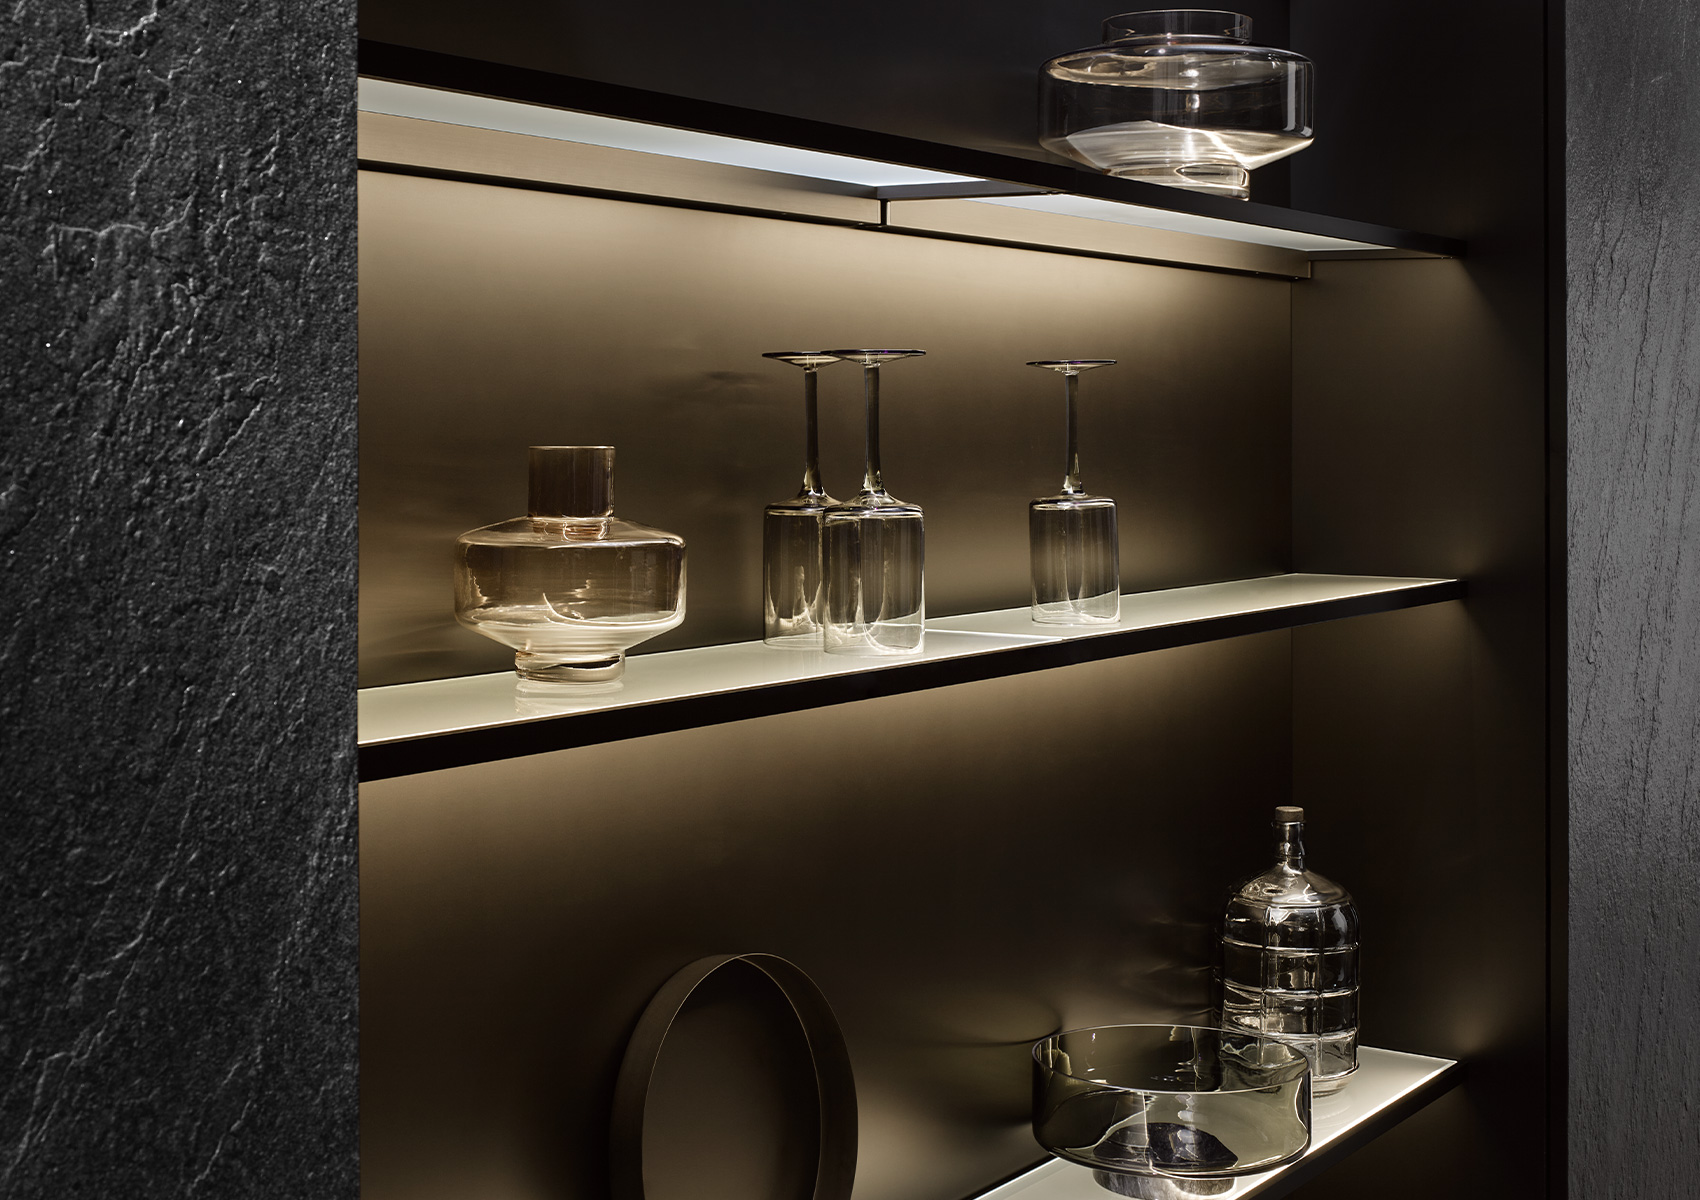 Detailed view of the kitchen splashback with two illuminated shelves and decorative tableware